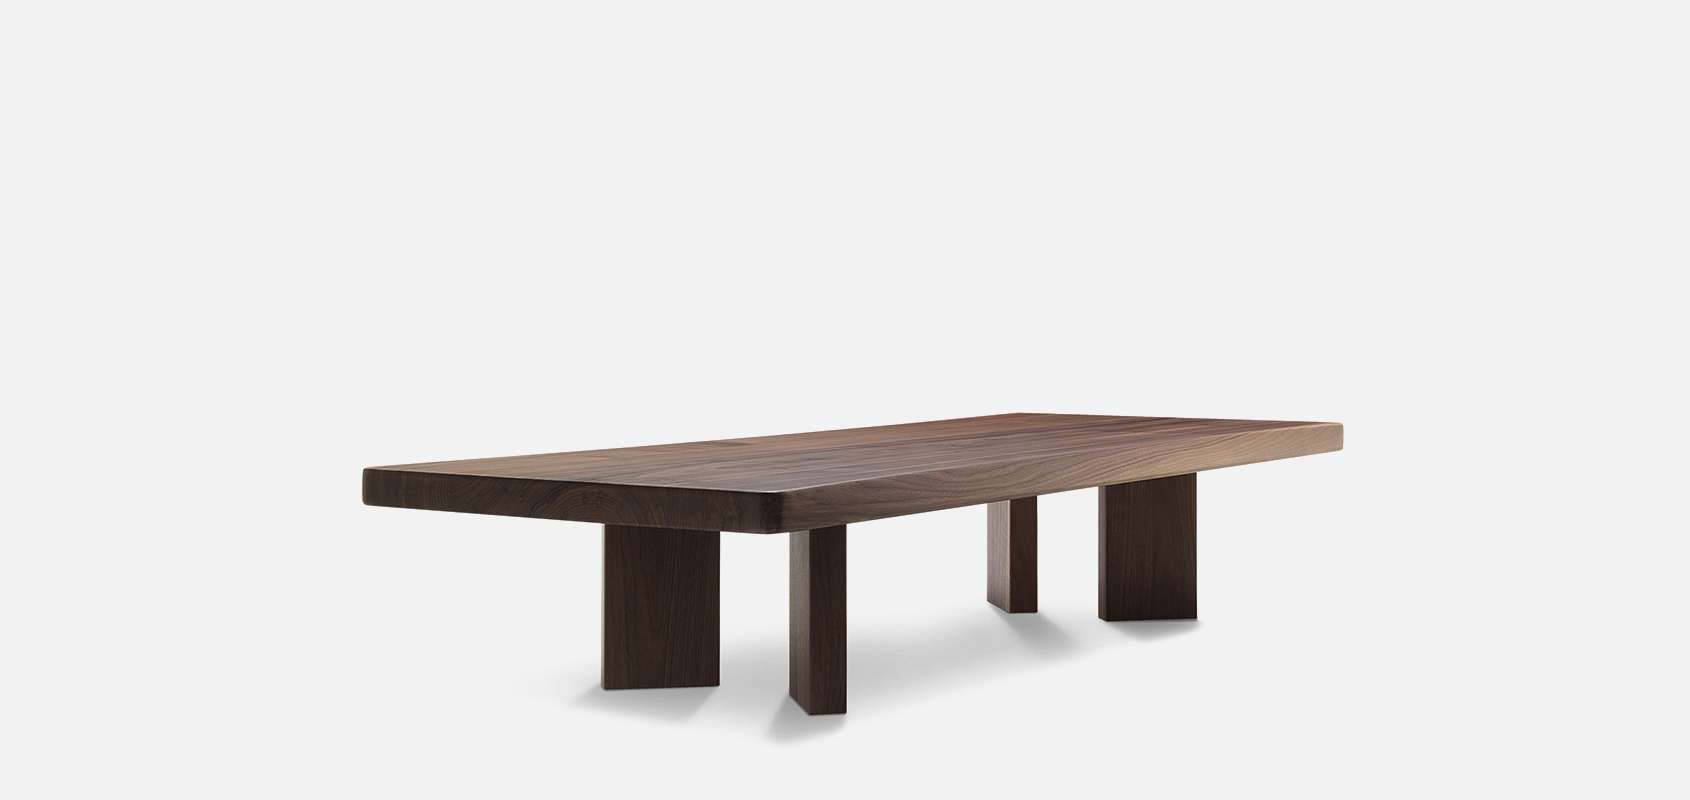 Plana Low Table